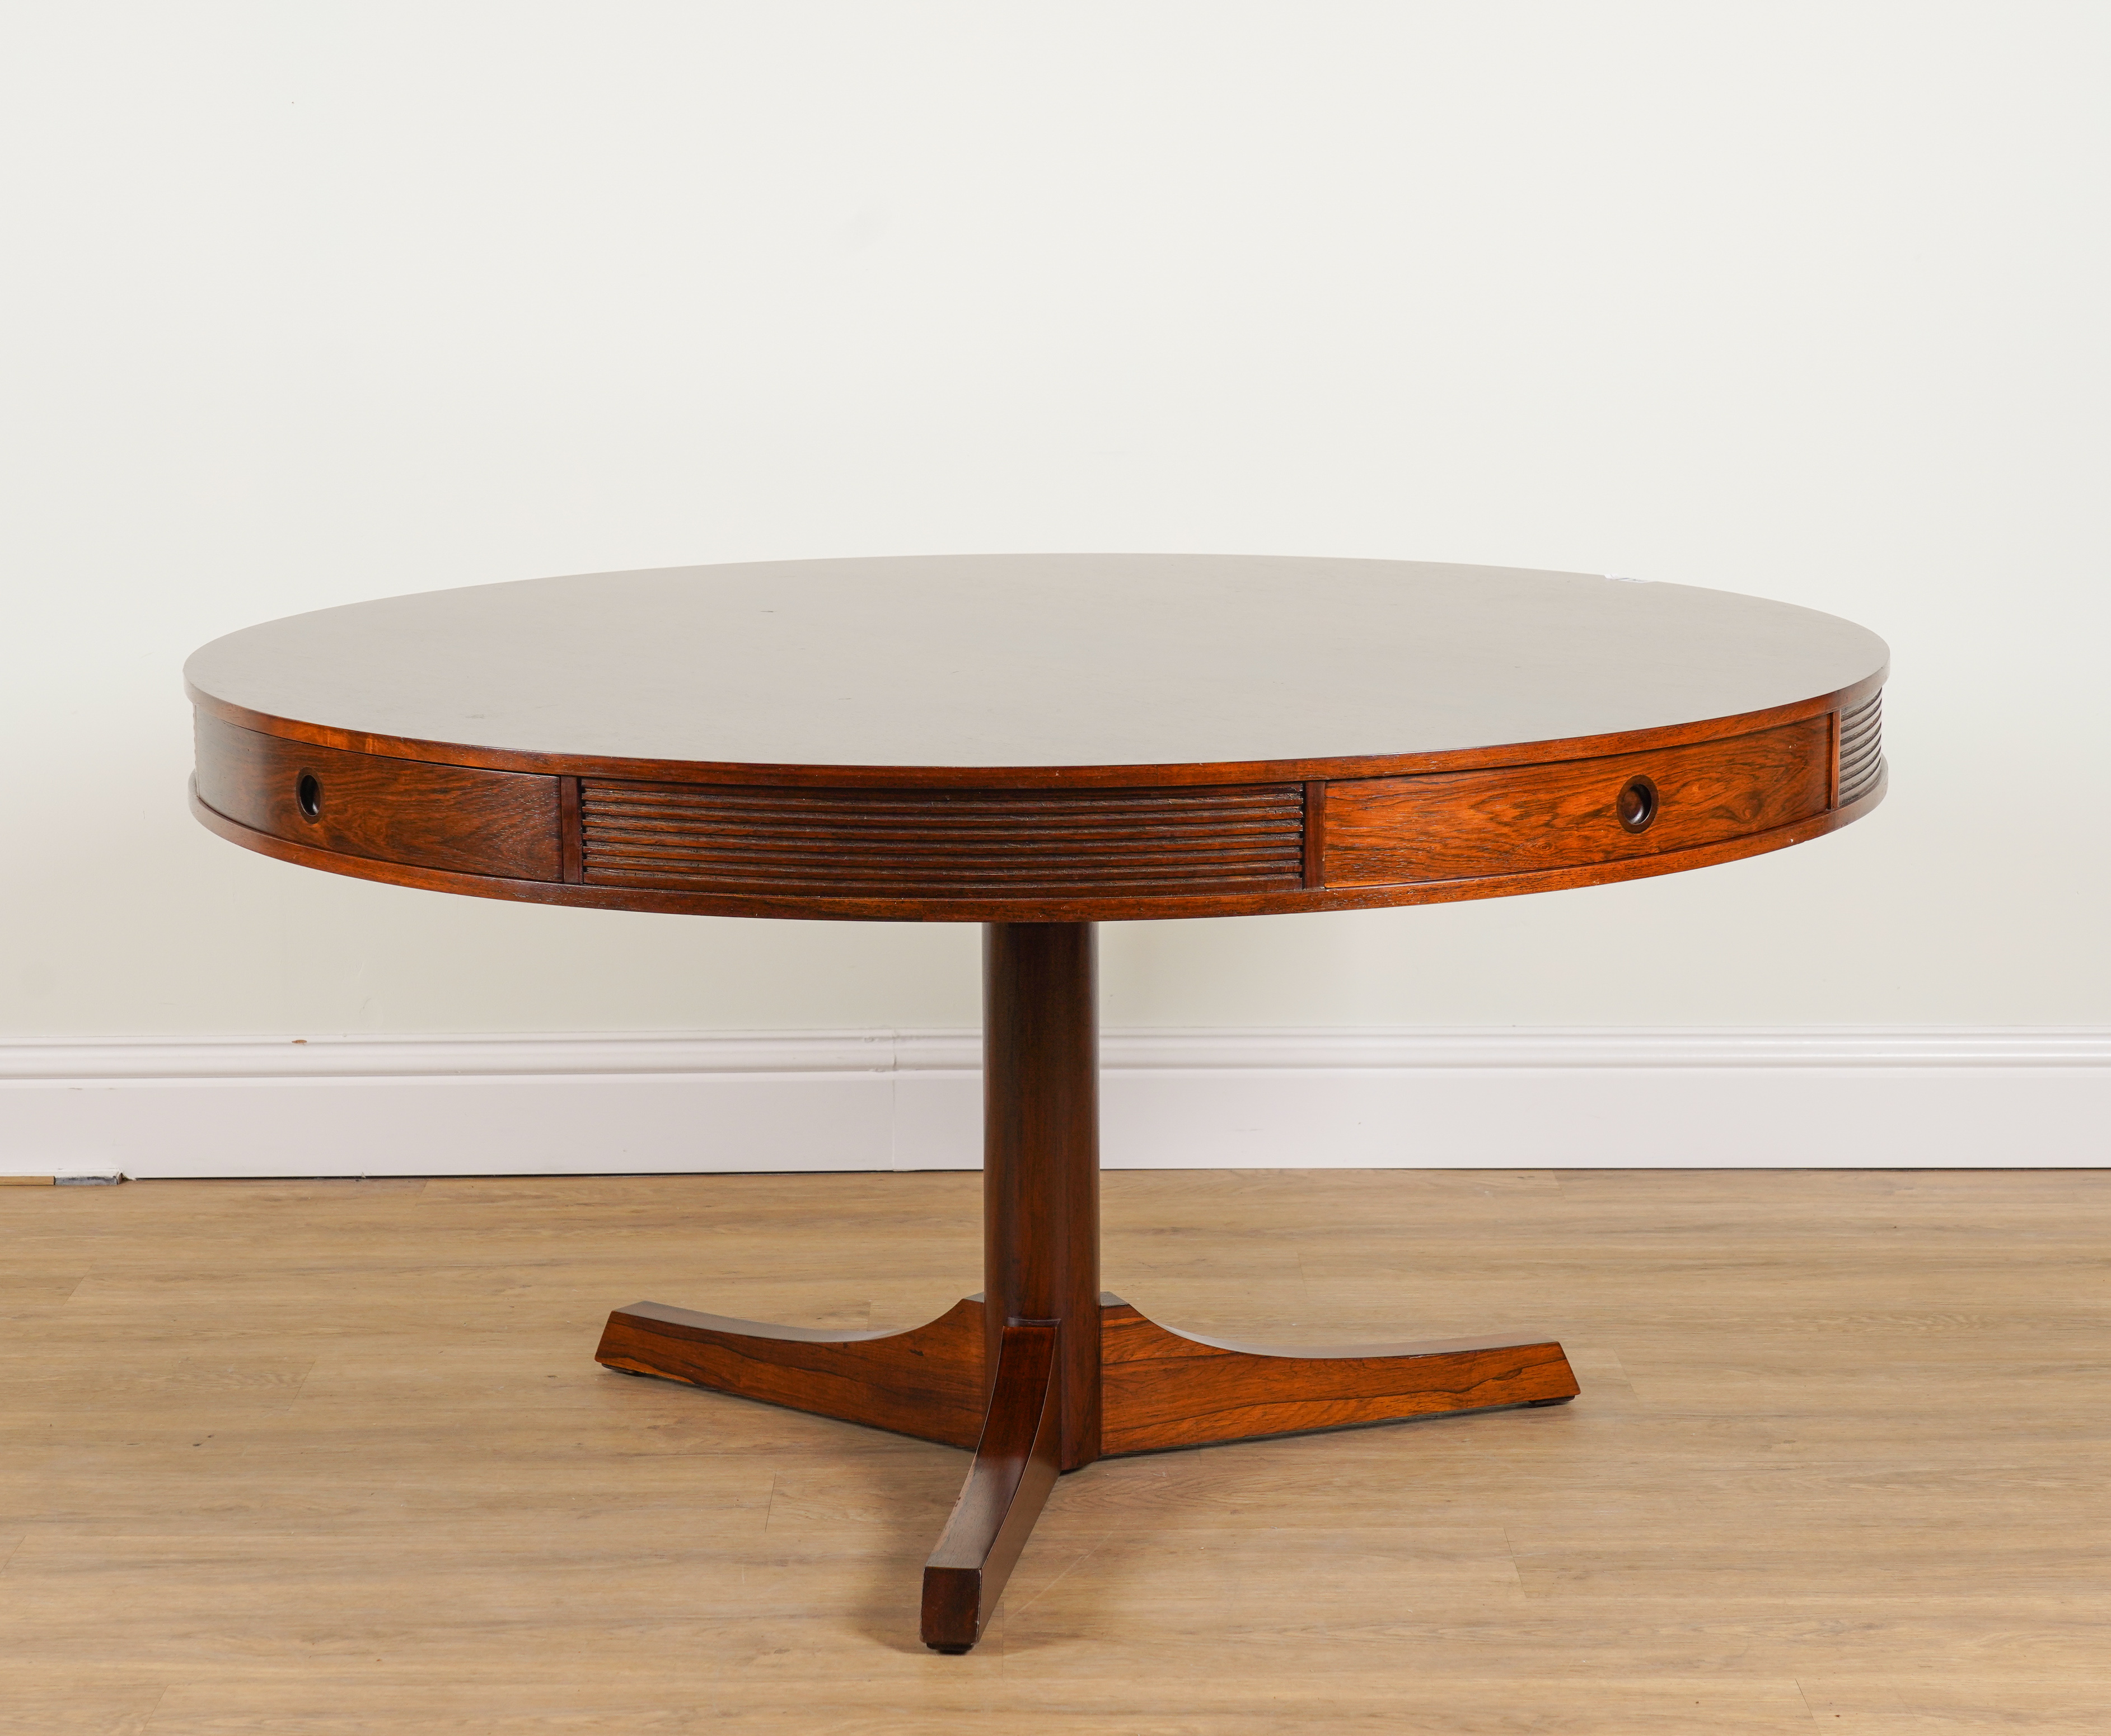 ARCHIE SHINE FOR HEALS FURNITURE; A MID 20TH CENTURY ROSEWOOD CIRCULAR DINING TABLE